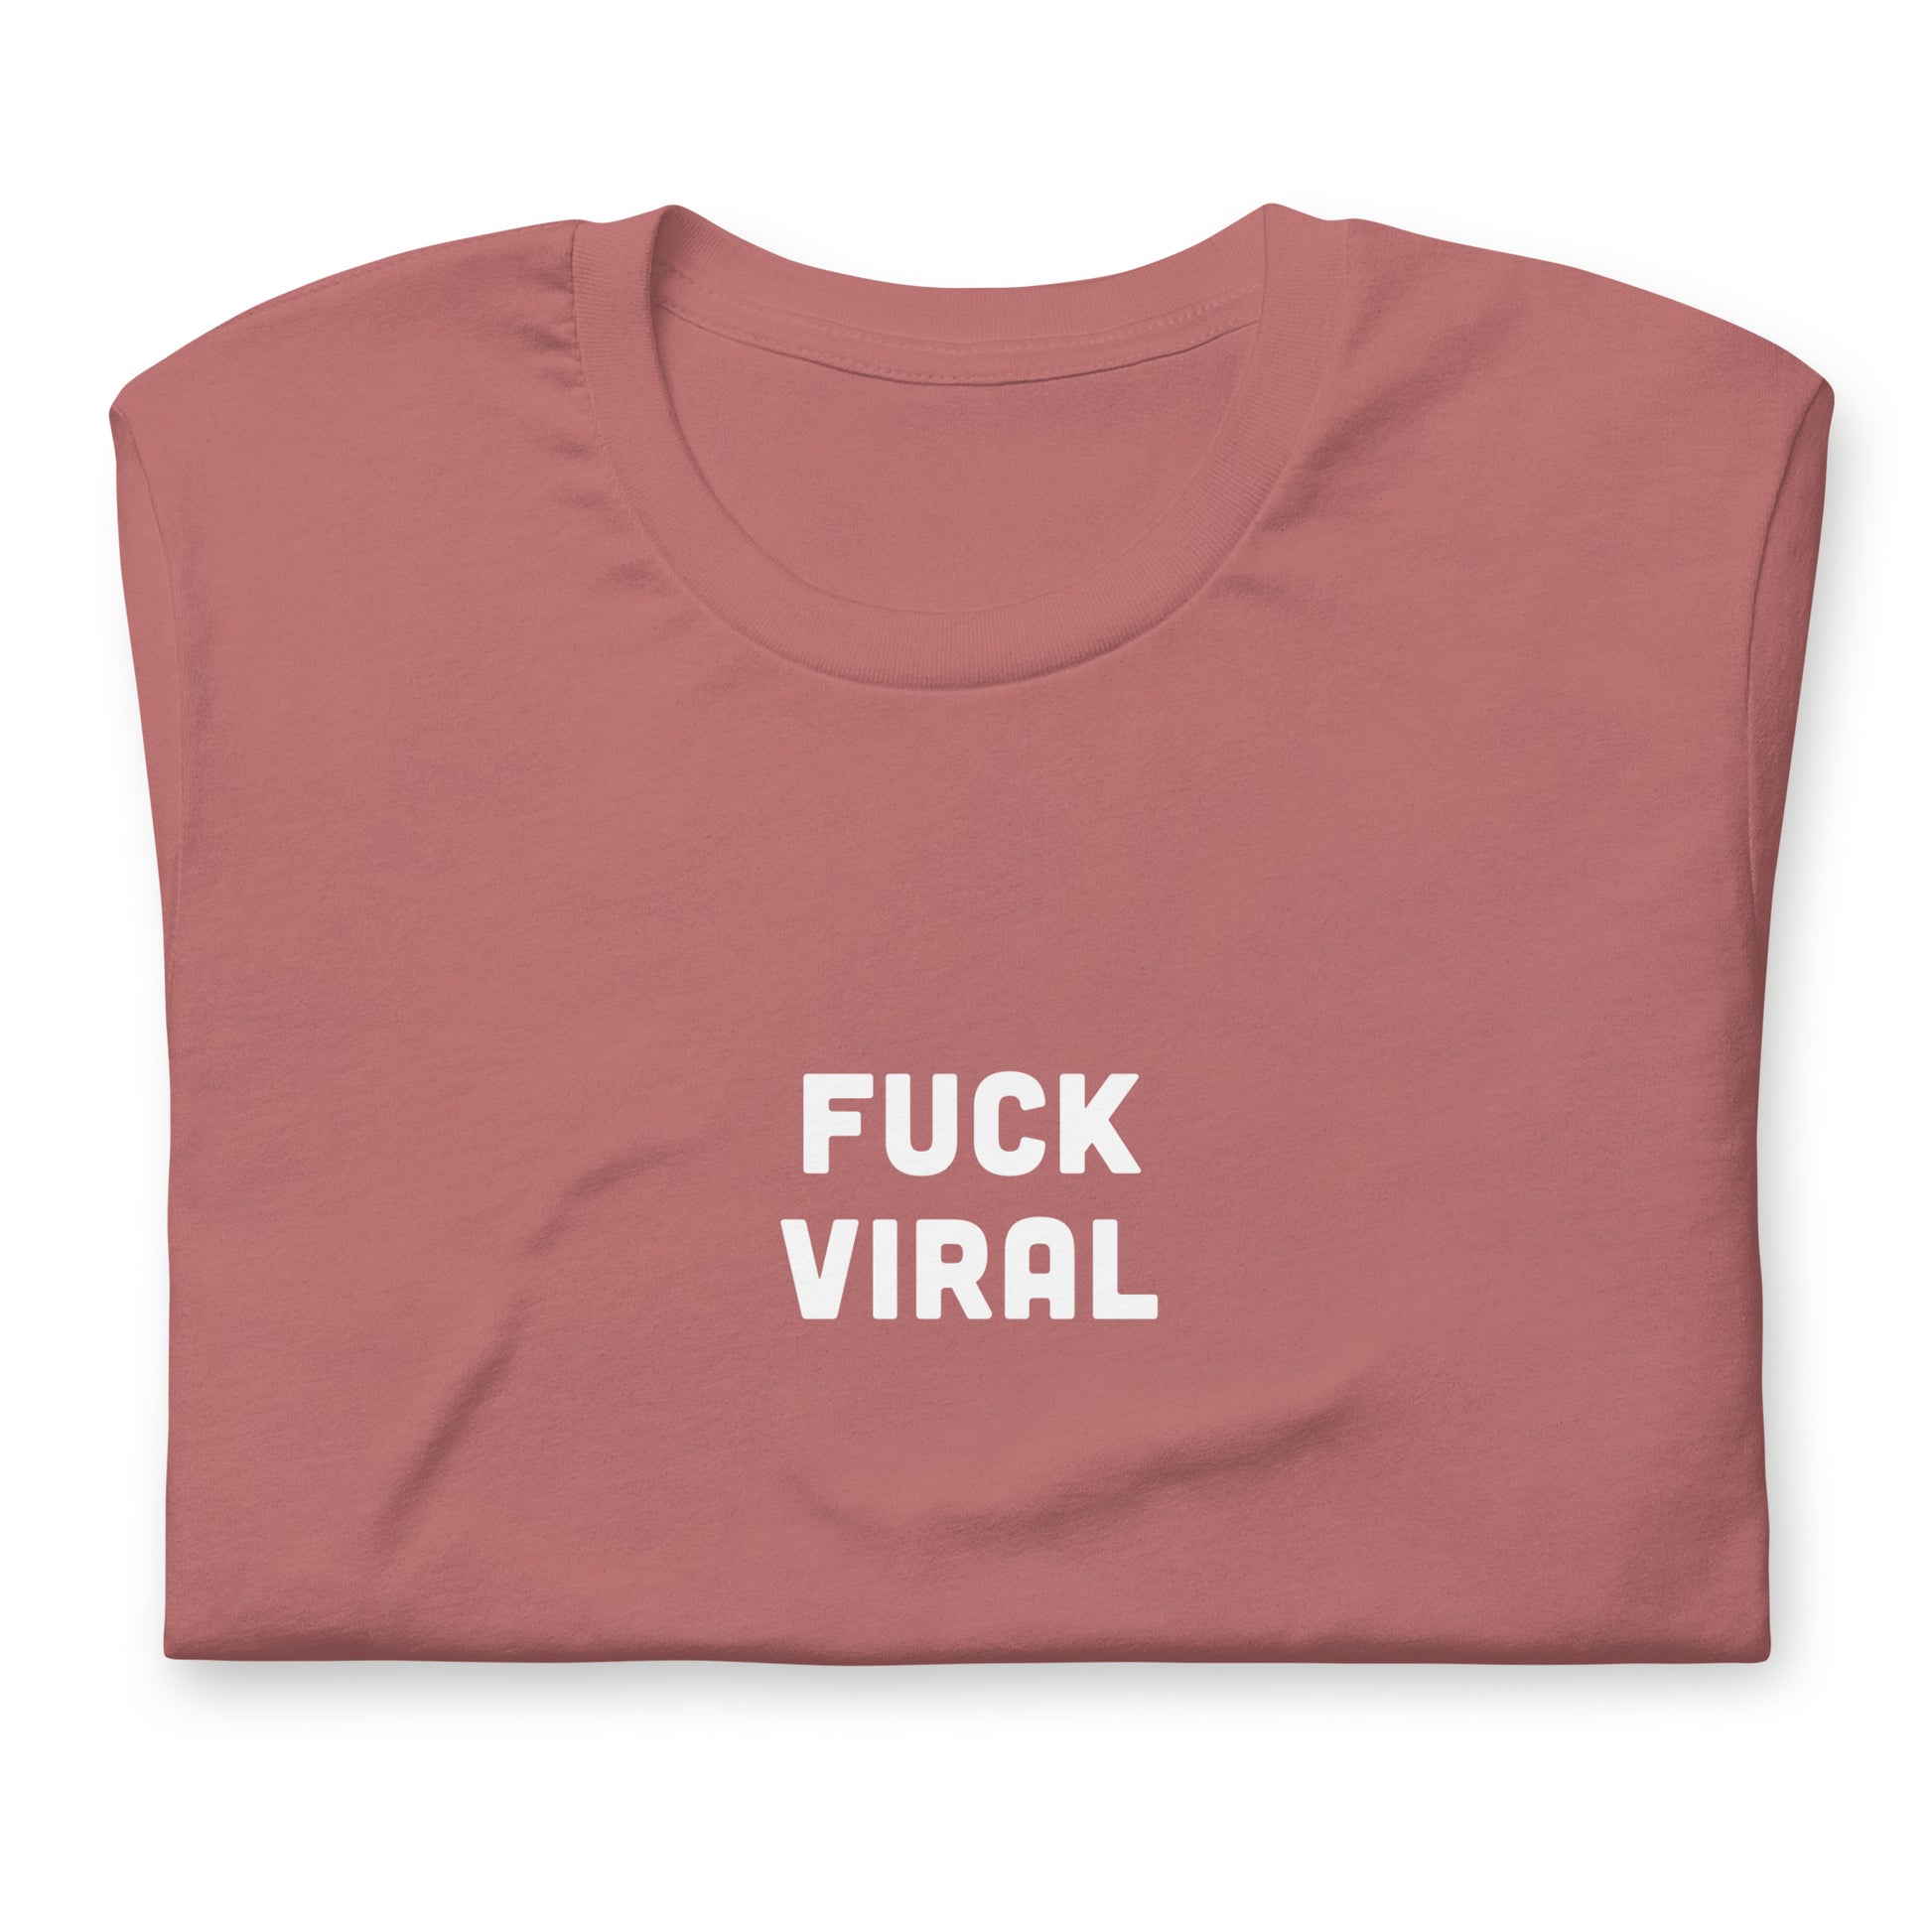 Fuck Viral T-Shirt Size XL Color Navy